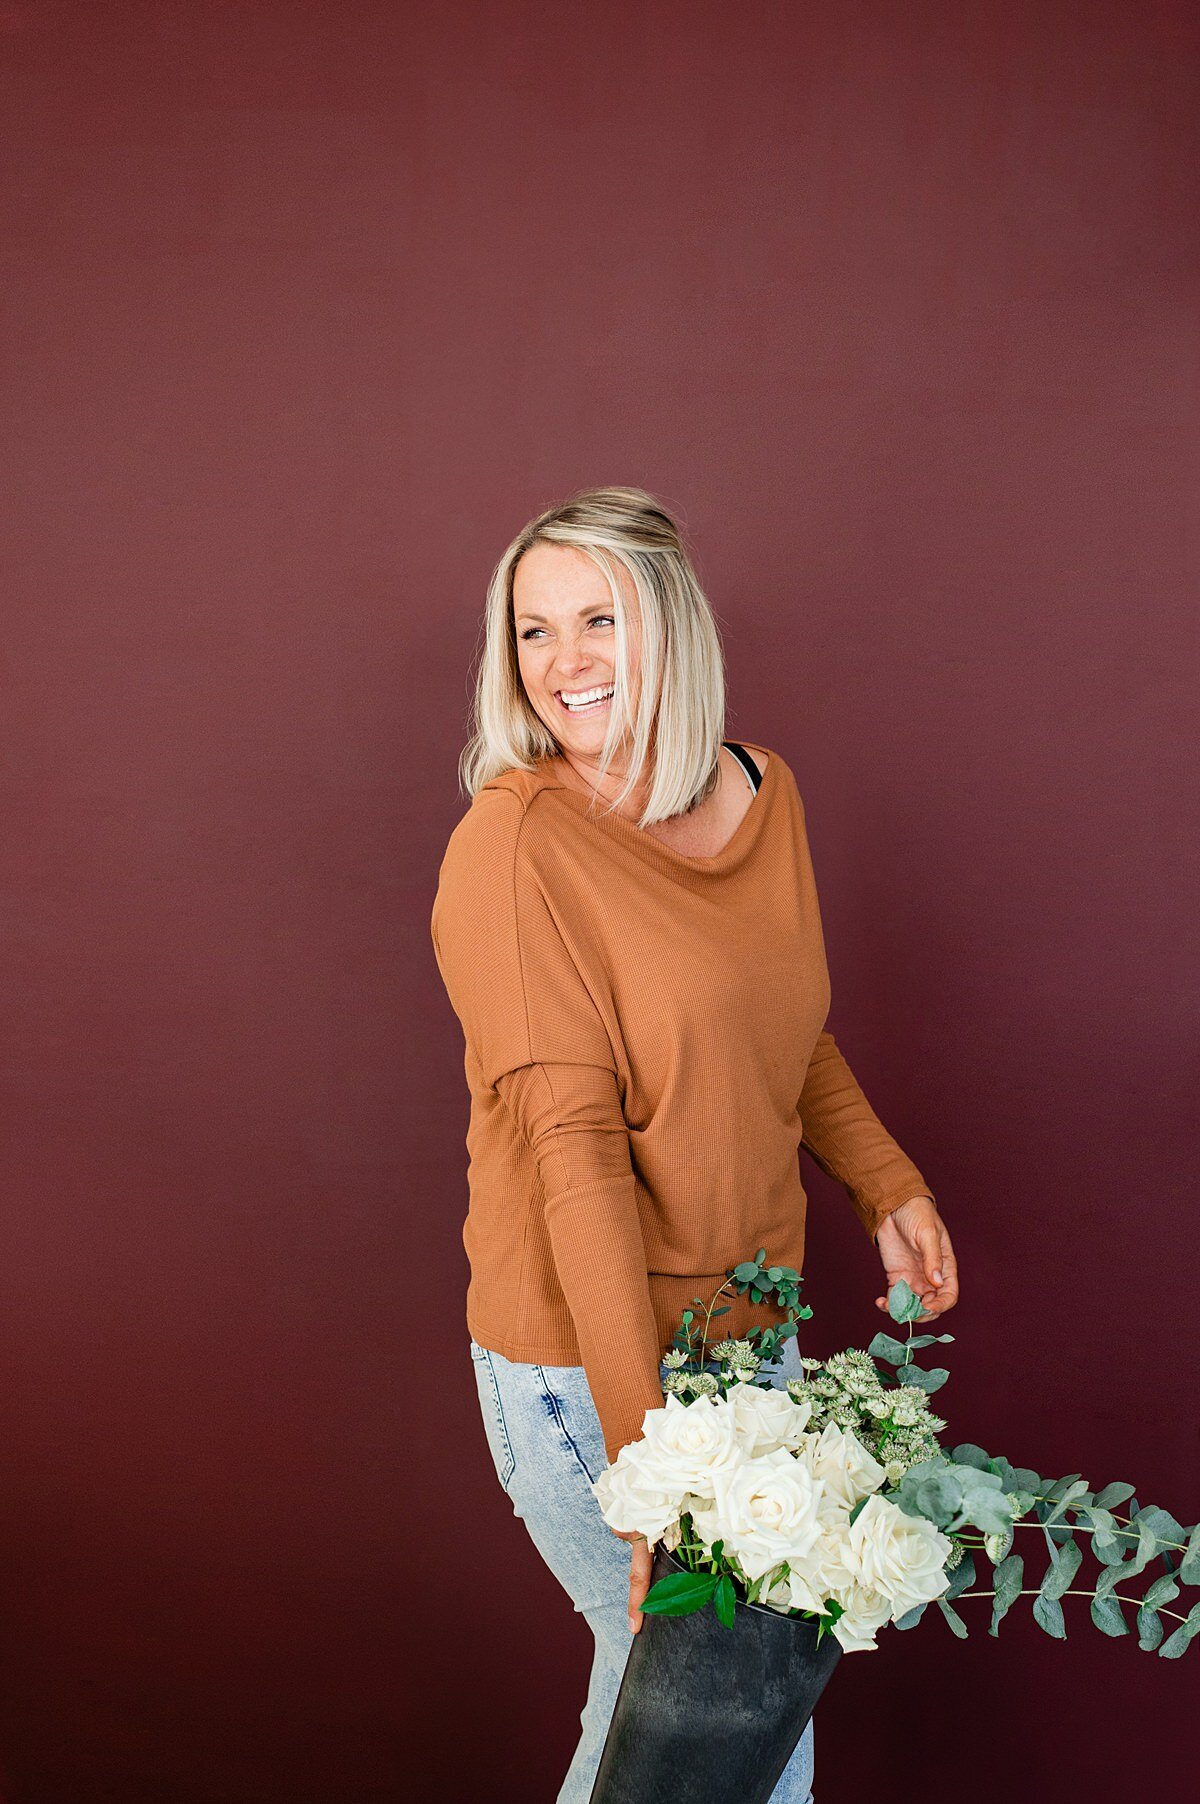 Florist standing in front of a maroon wall holding a bucket of flowers and laughing